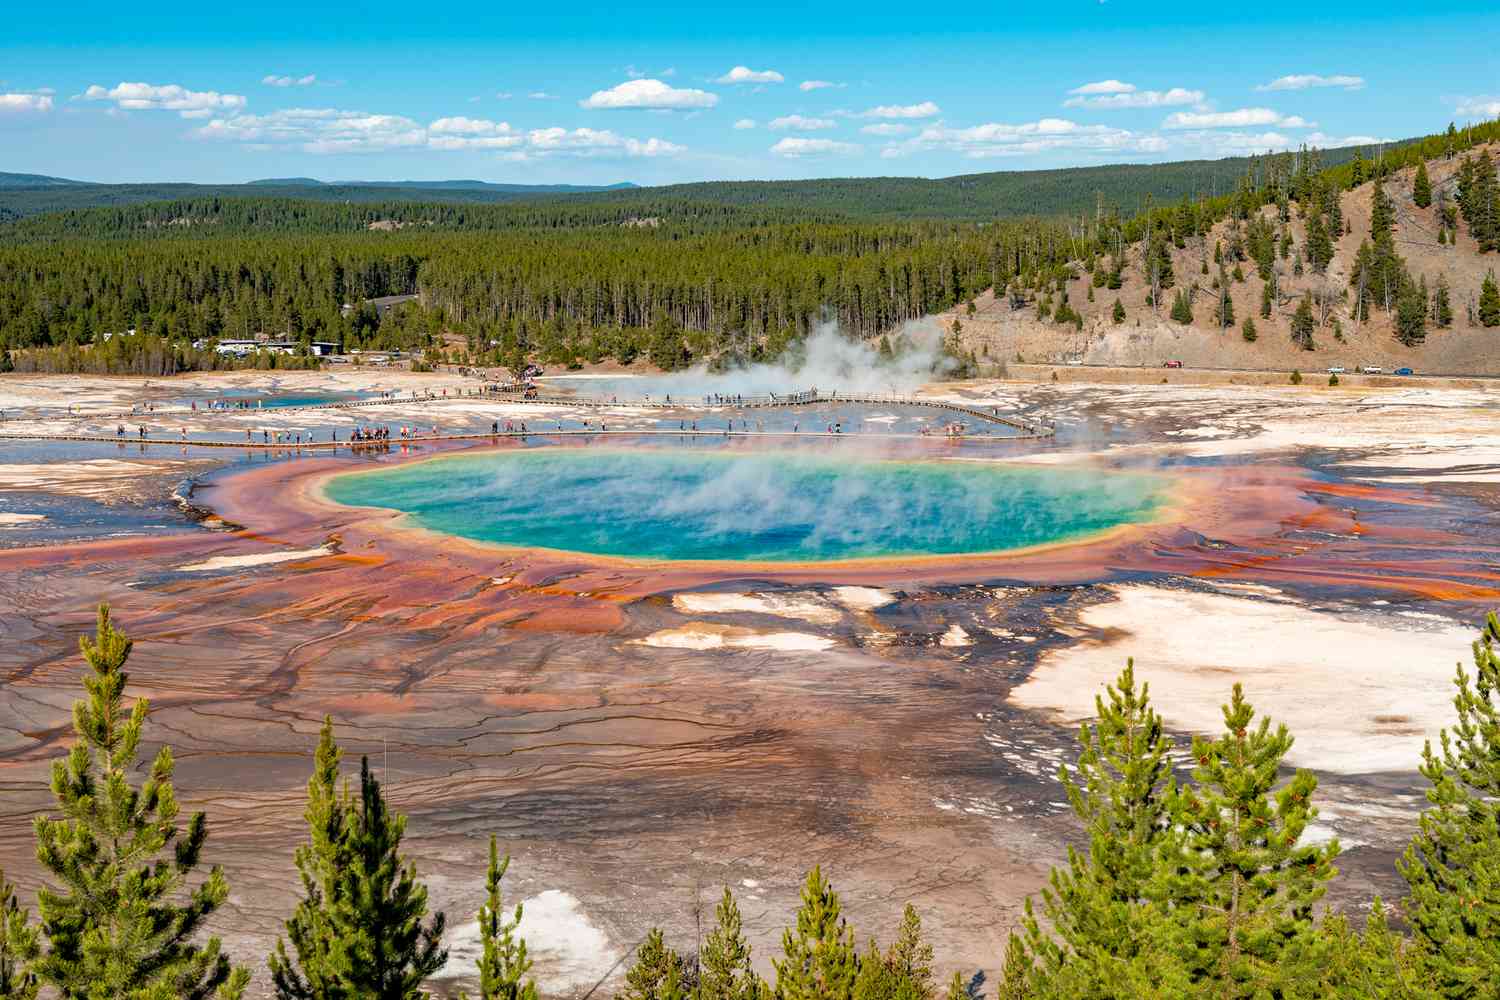 Top 10 National Parks in The US